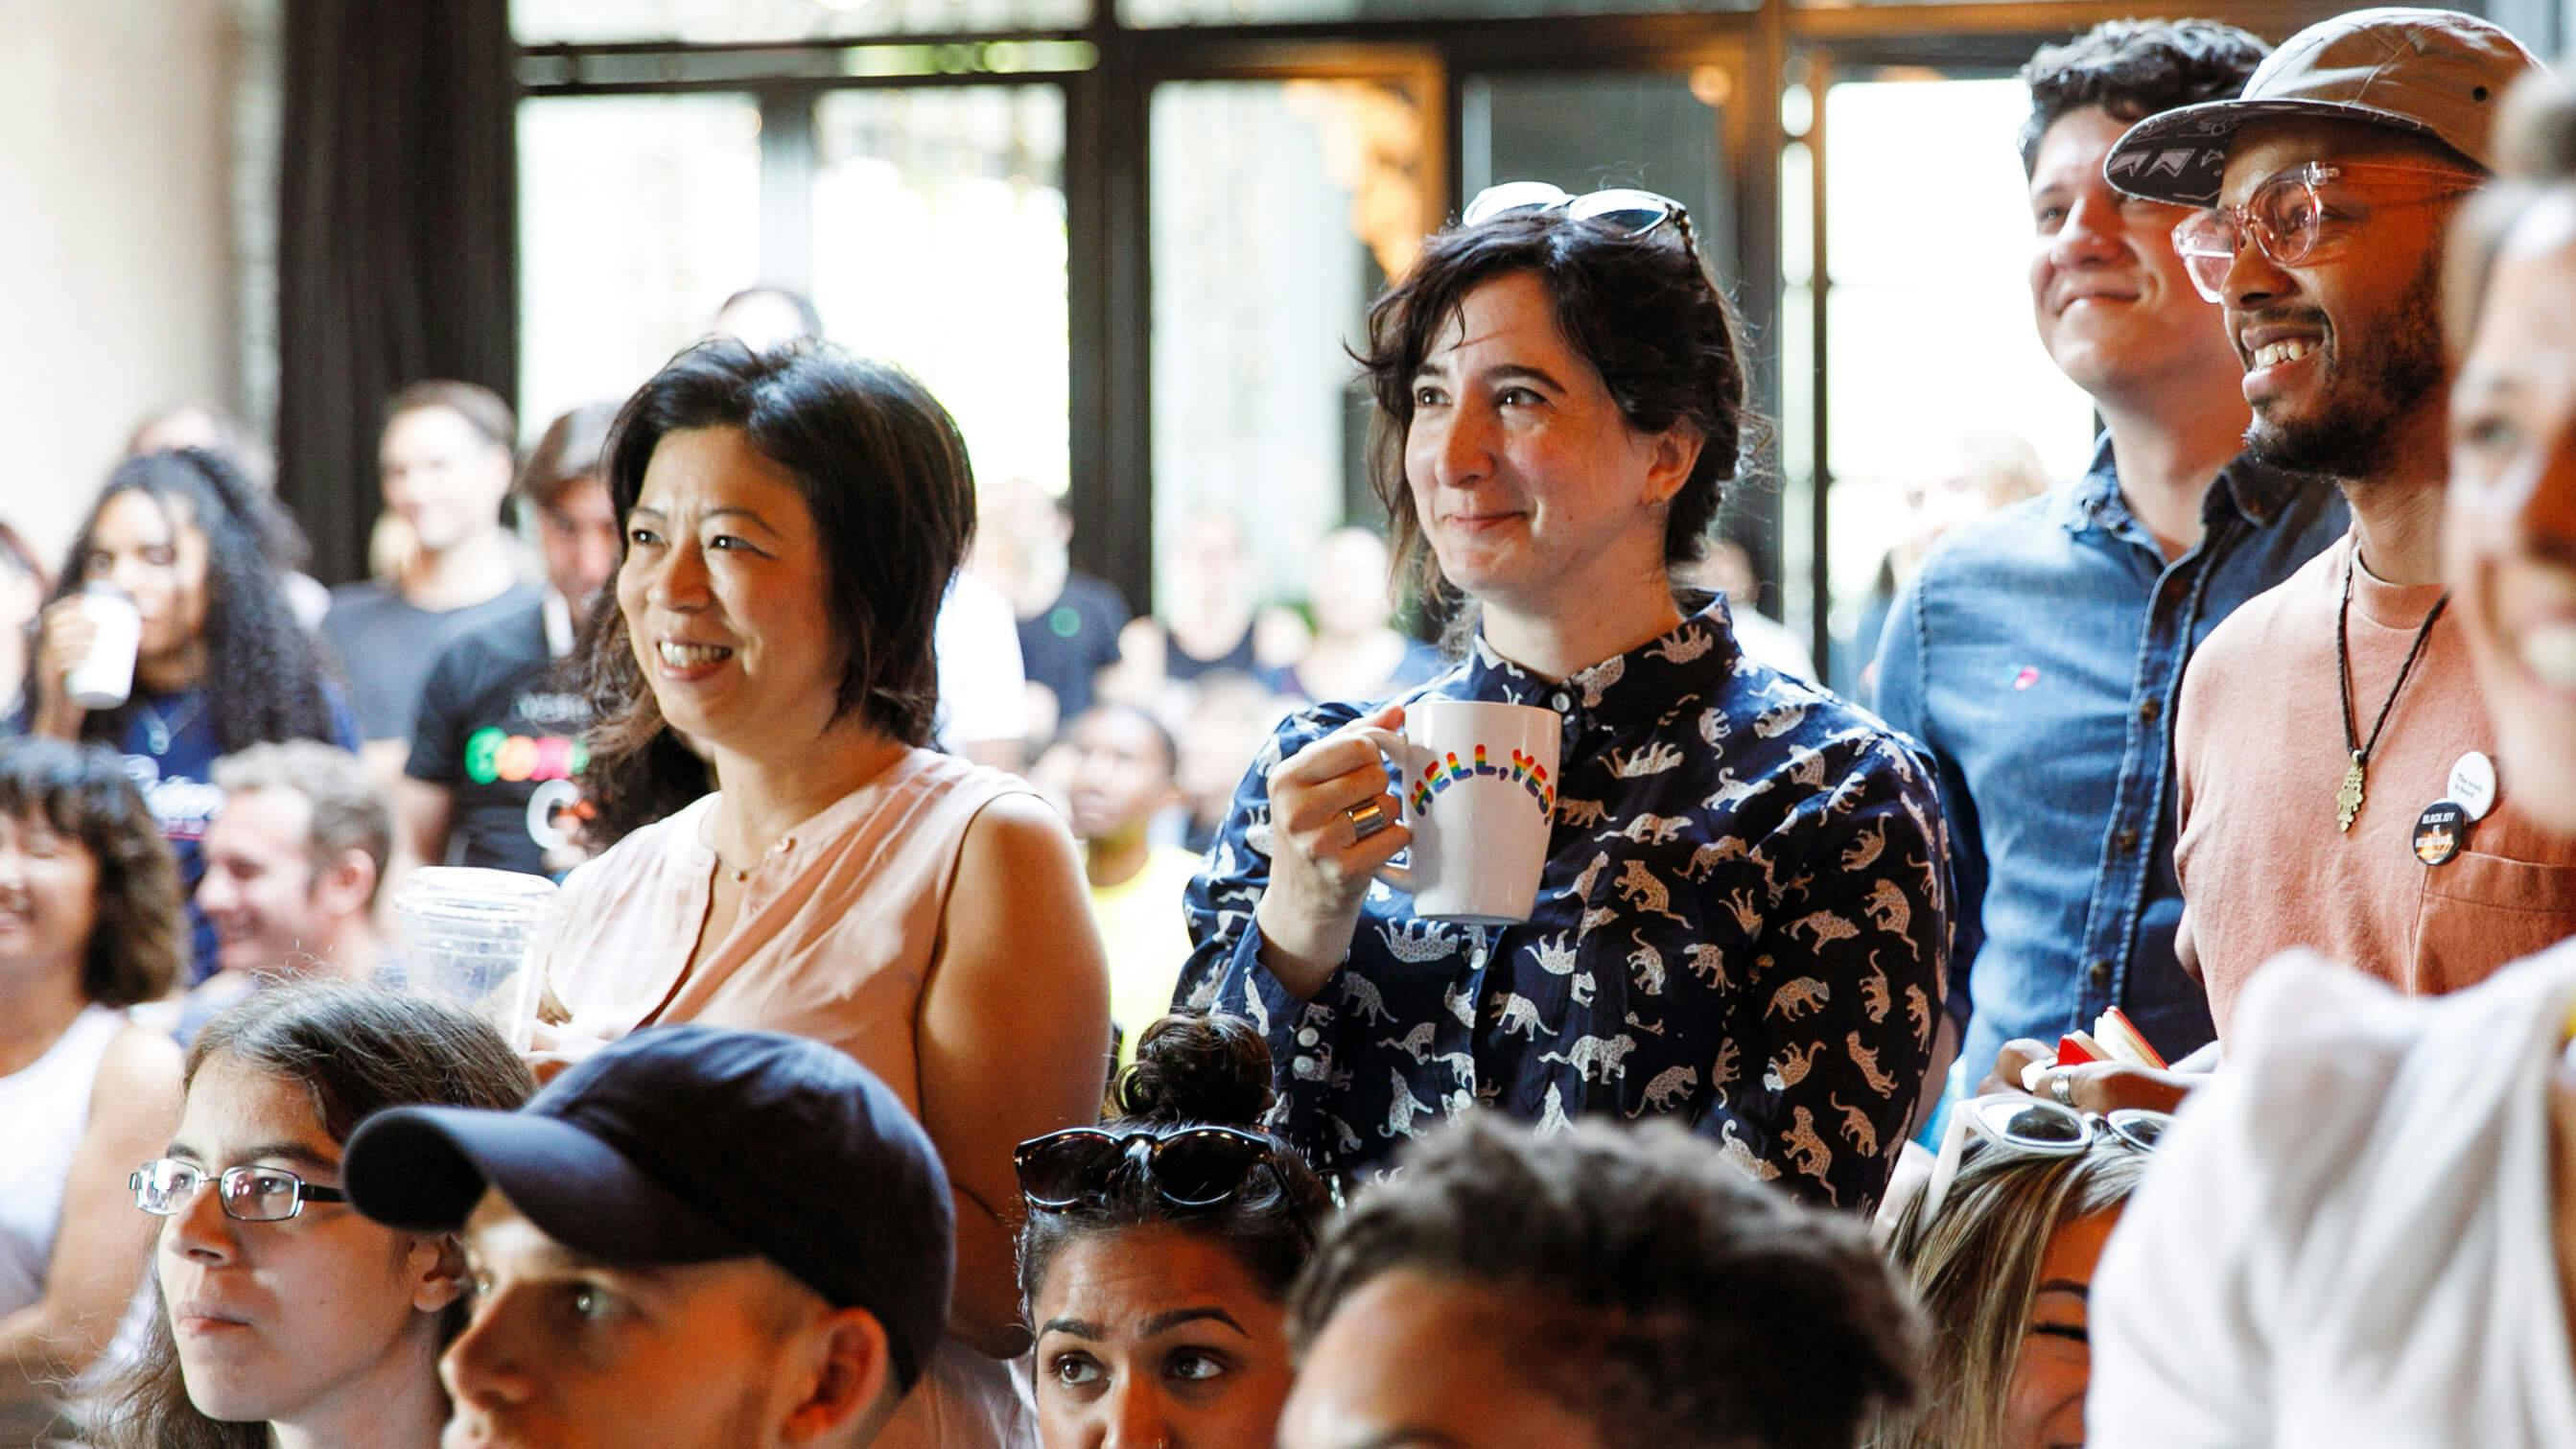 Come together now: Creative​Mornings builds connection on a global scale